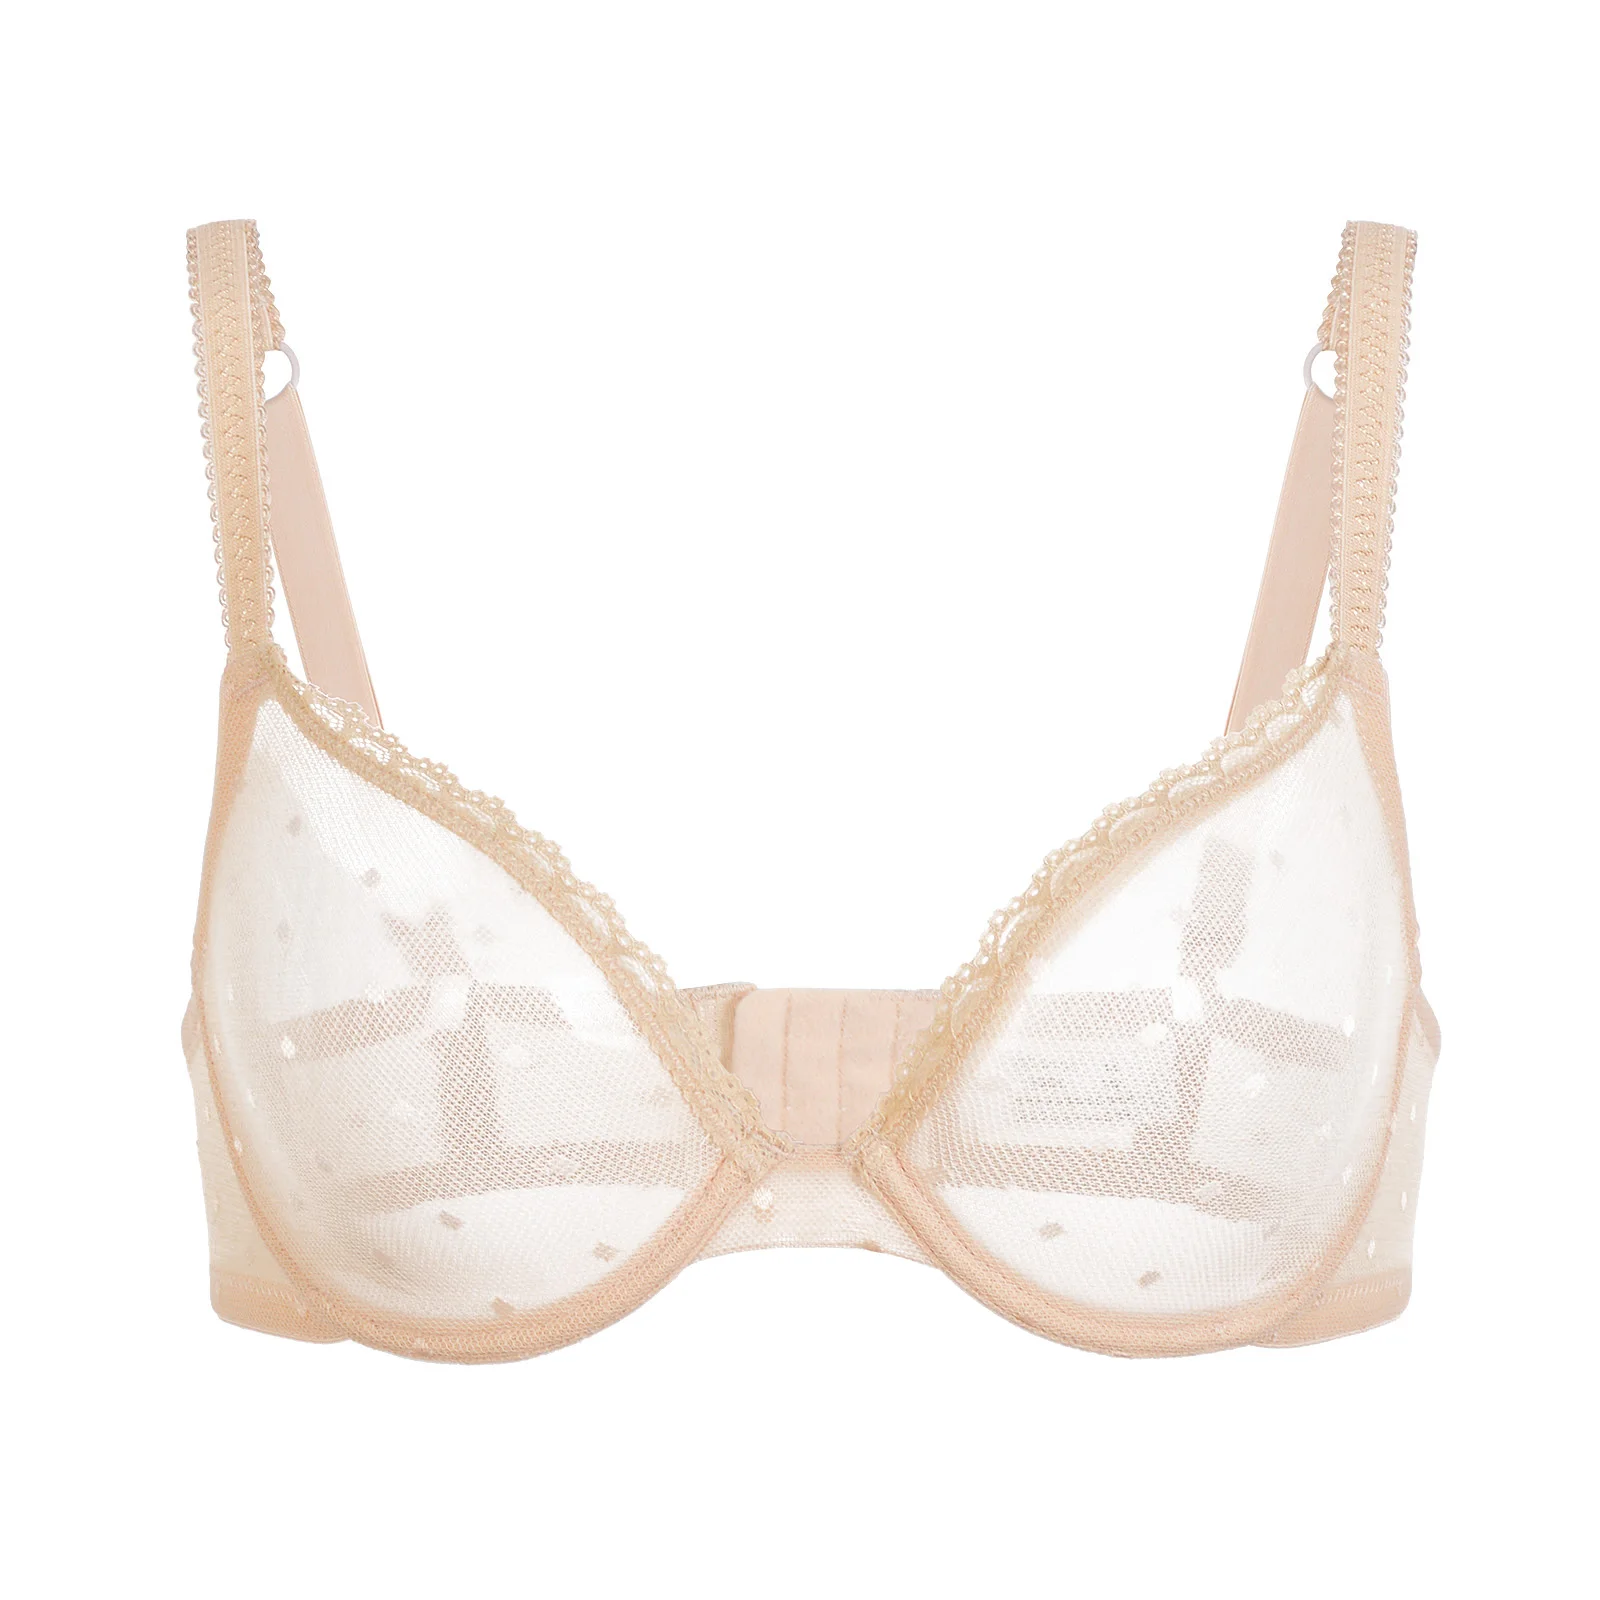 YBCG Floral Sexy Bra See Through Ultra Thin Lace Lingerie Mesh